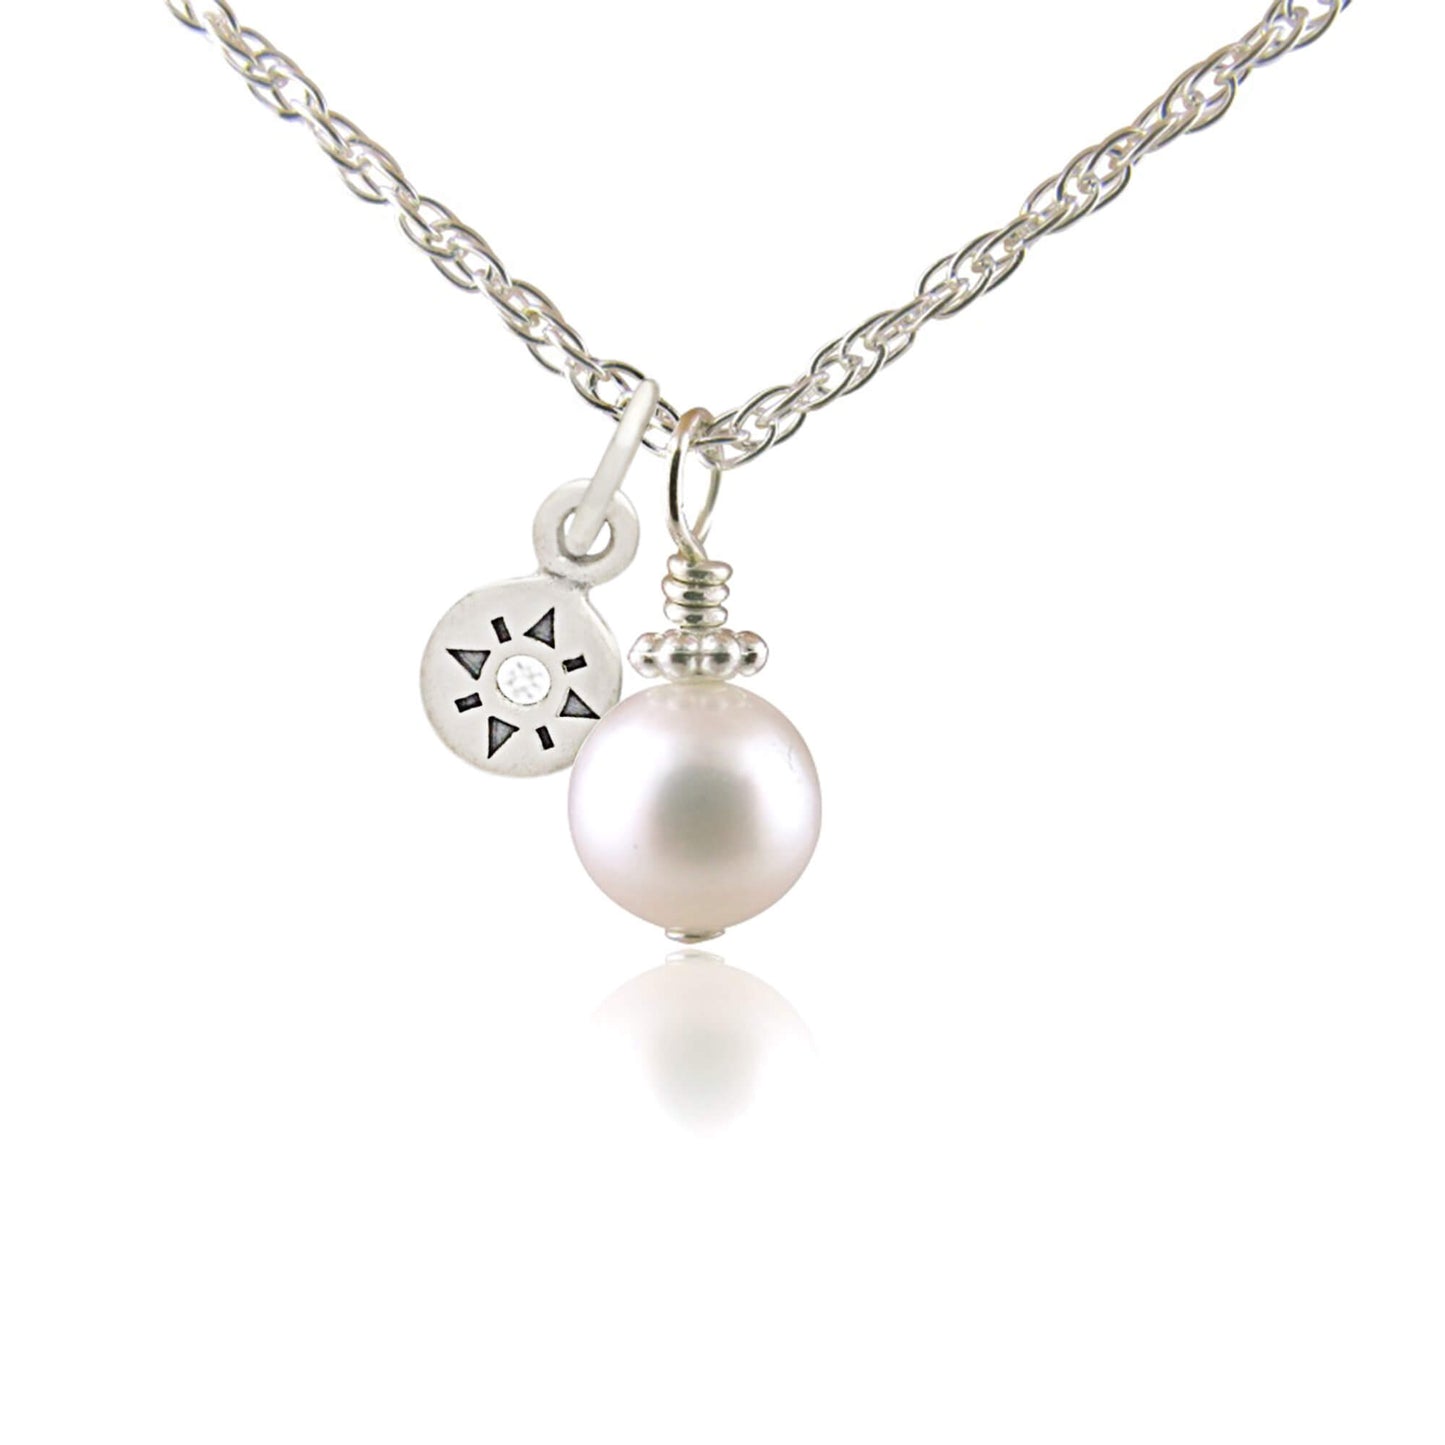 *NEW* Diamond Compass Keepsake Pearl Necklace in Silver